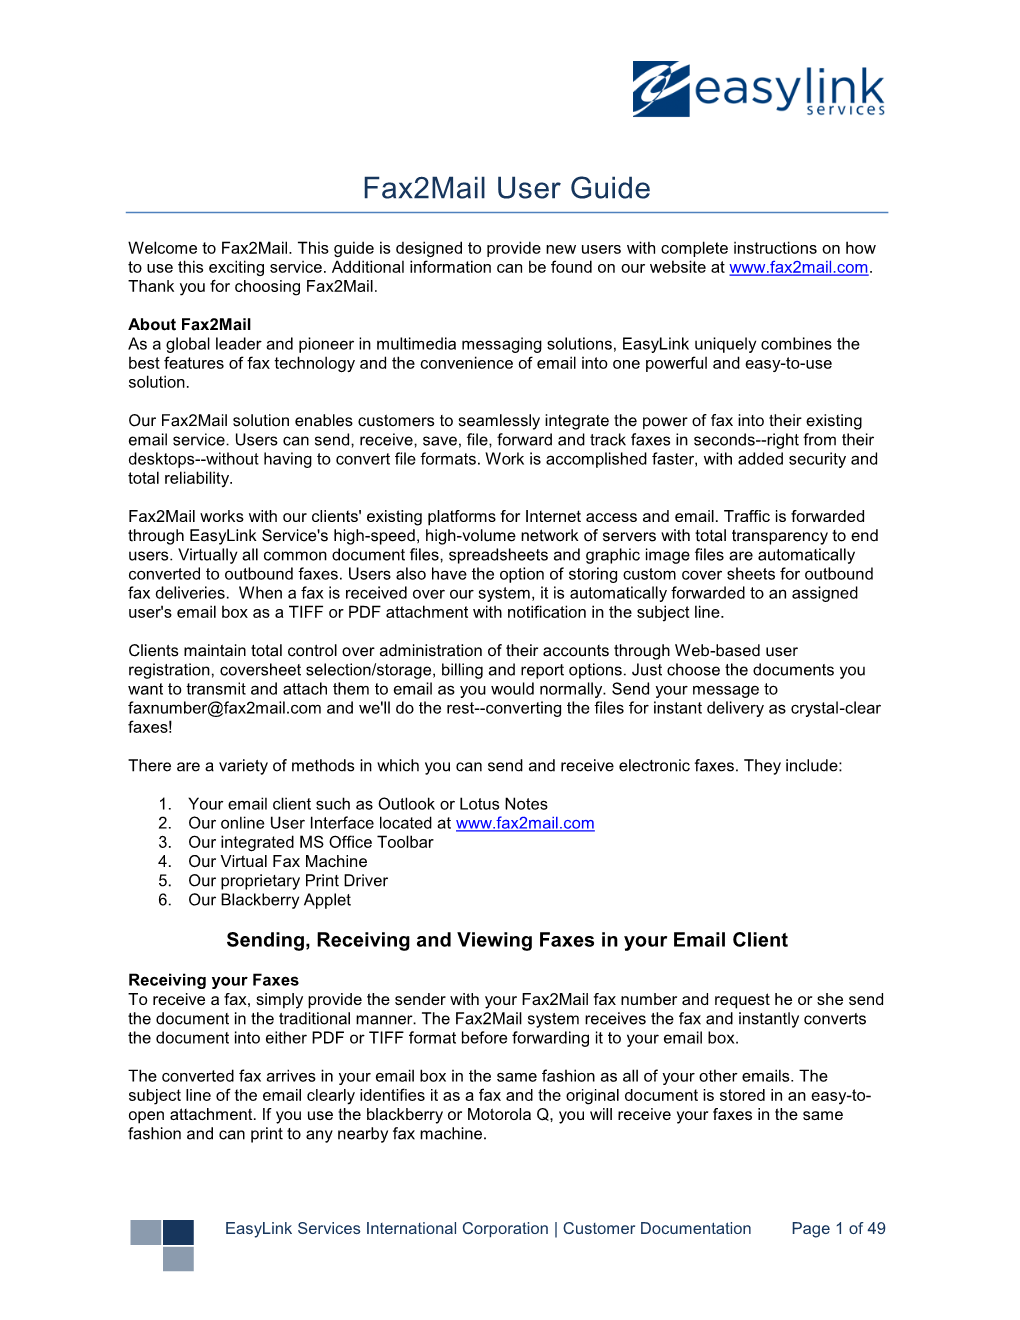 Fax2mail User Guide